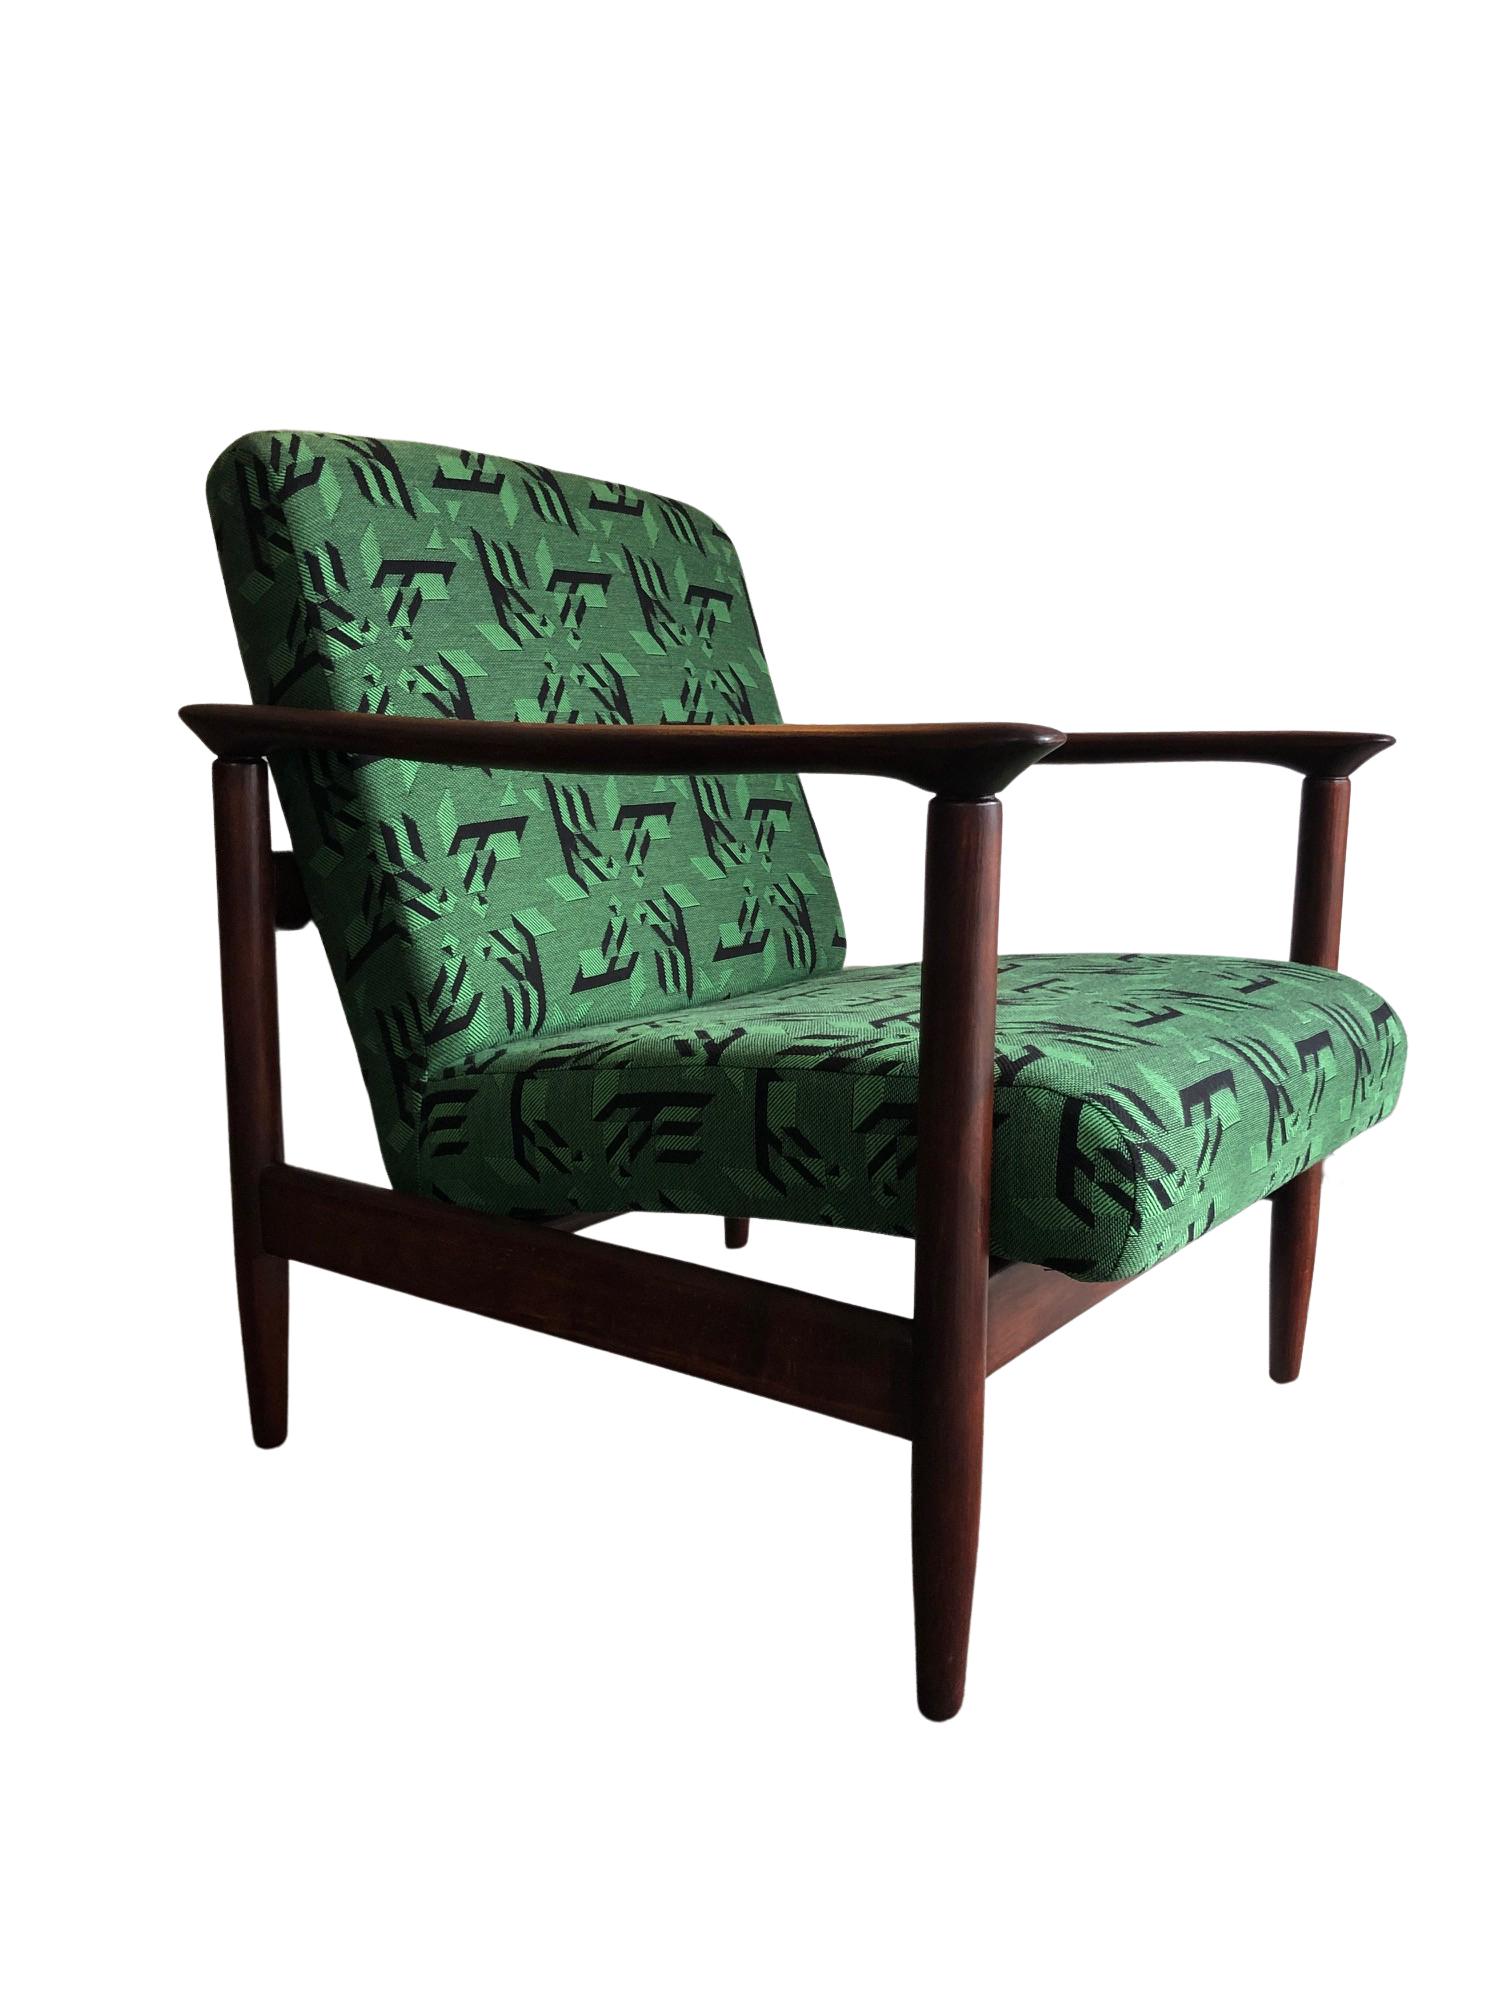 Polish Mid Century Armchairs in Green Jacquard, by Edmund Homa, 1960s, Set of Two For Sale